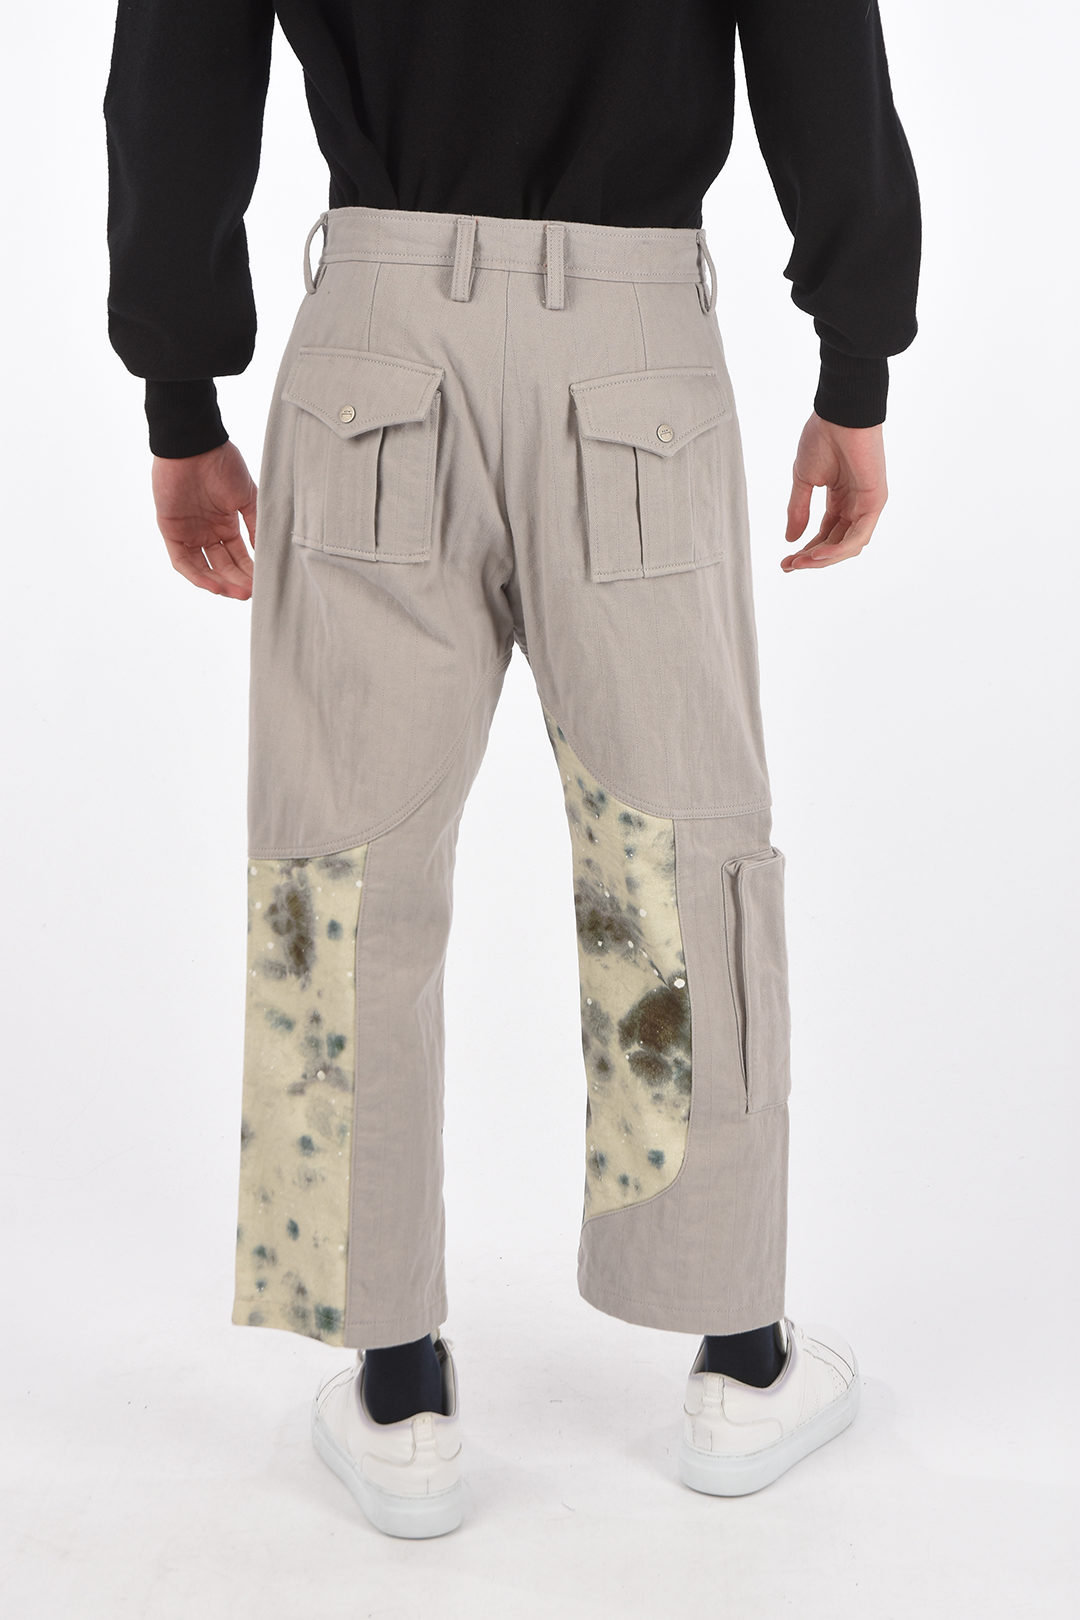 ACW RED TAG tie dye printed cargo pants